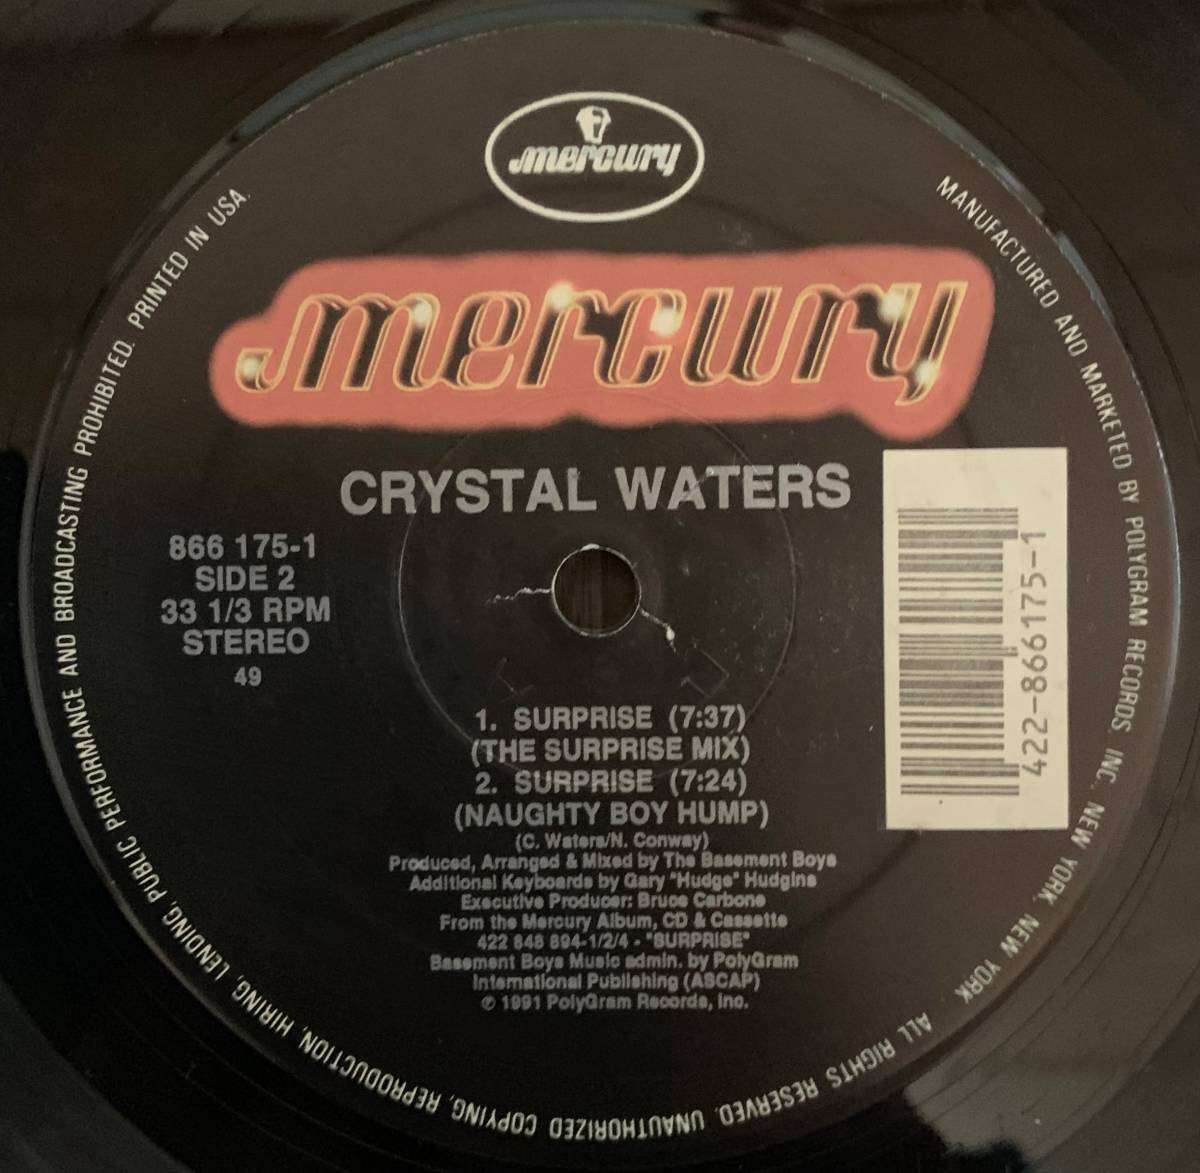 91'HOUSE / SURPRISE / Crystal Waters US盤_画像2